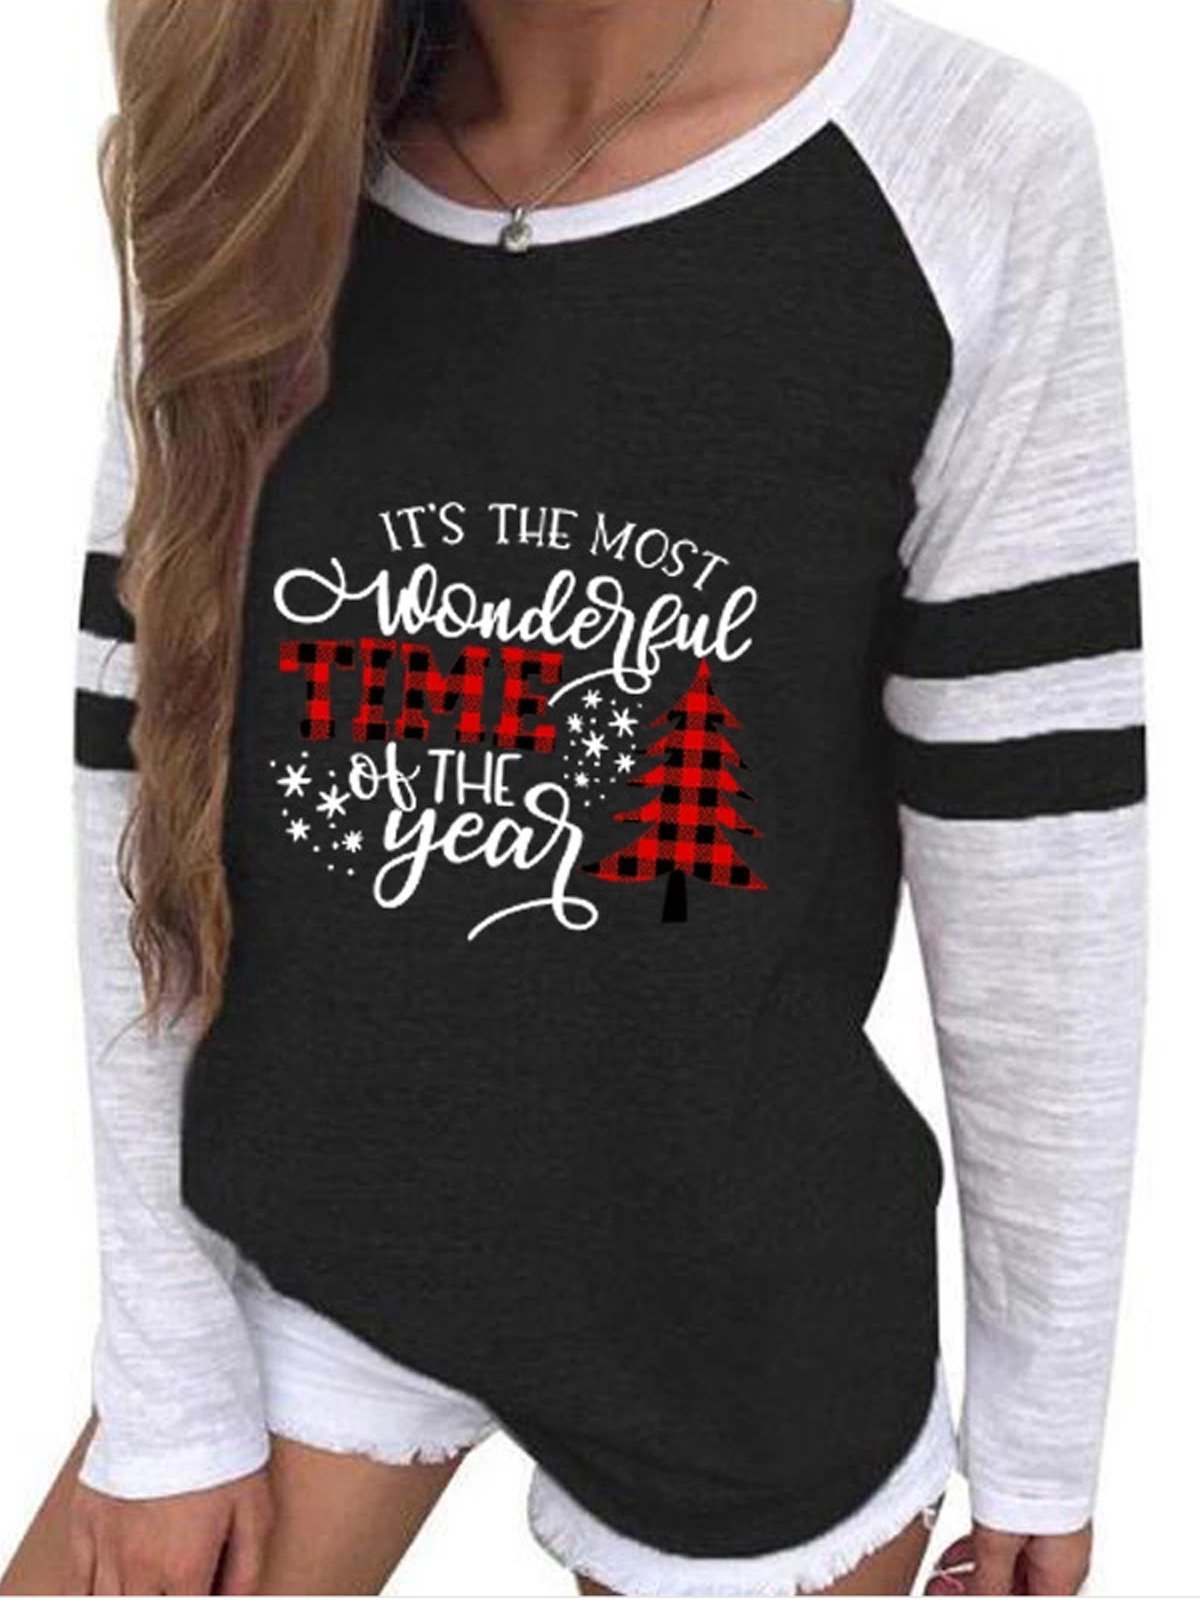 Long Sleeve Letter Top